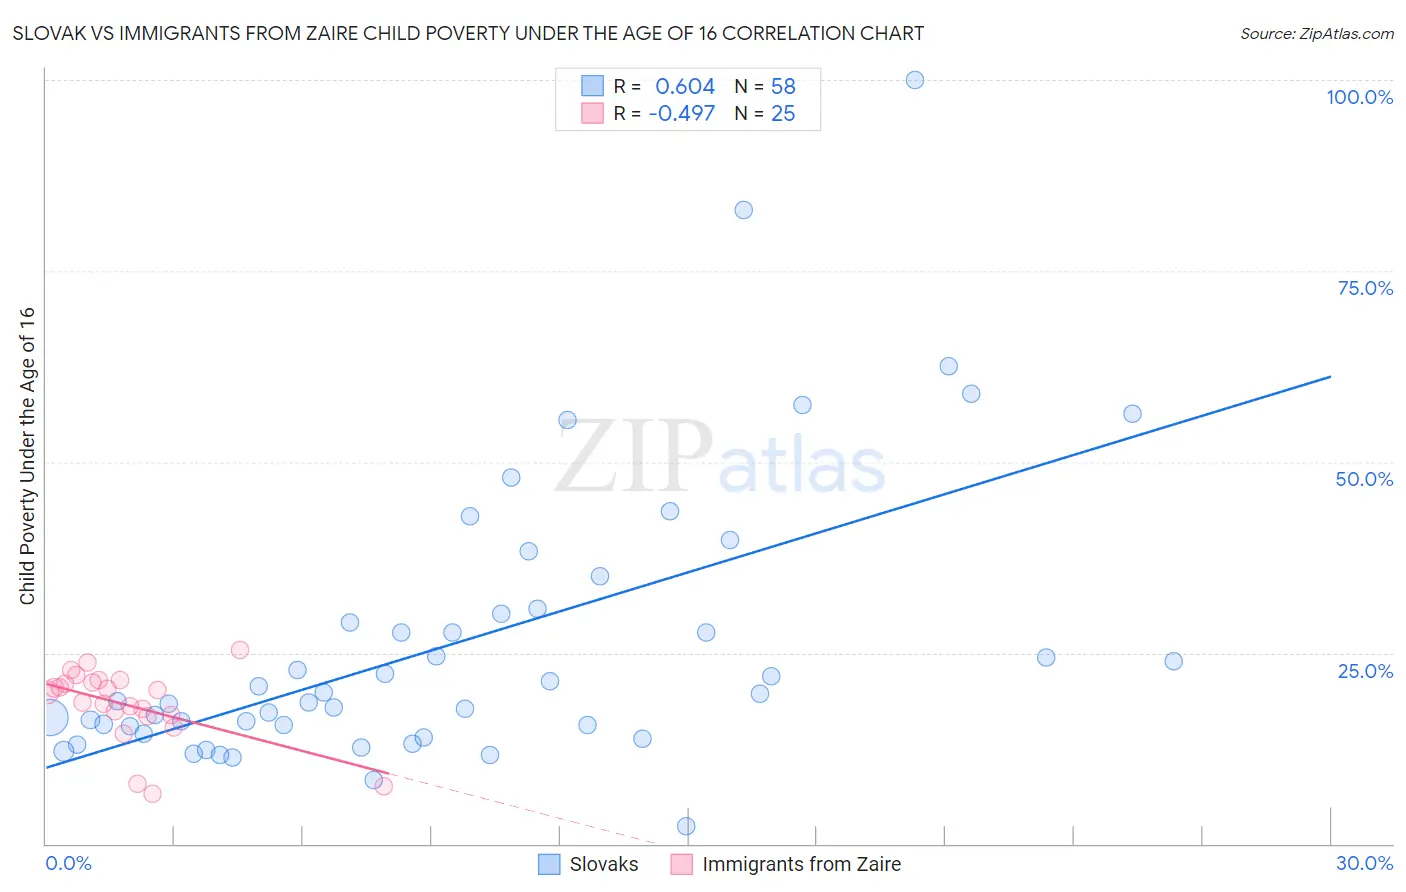 Slovak vs Immigrants from Zaire Child Poverty Under the Age of 16